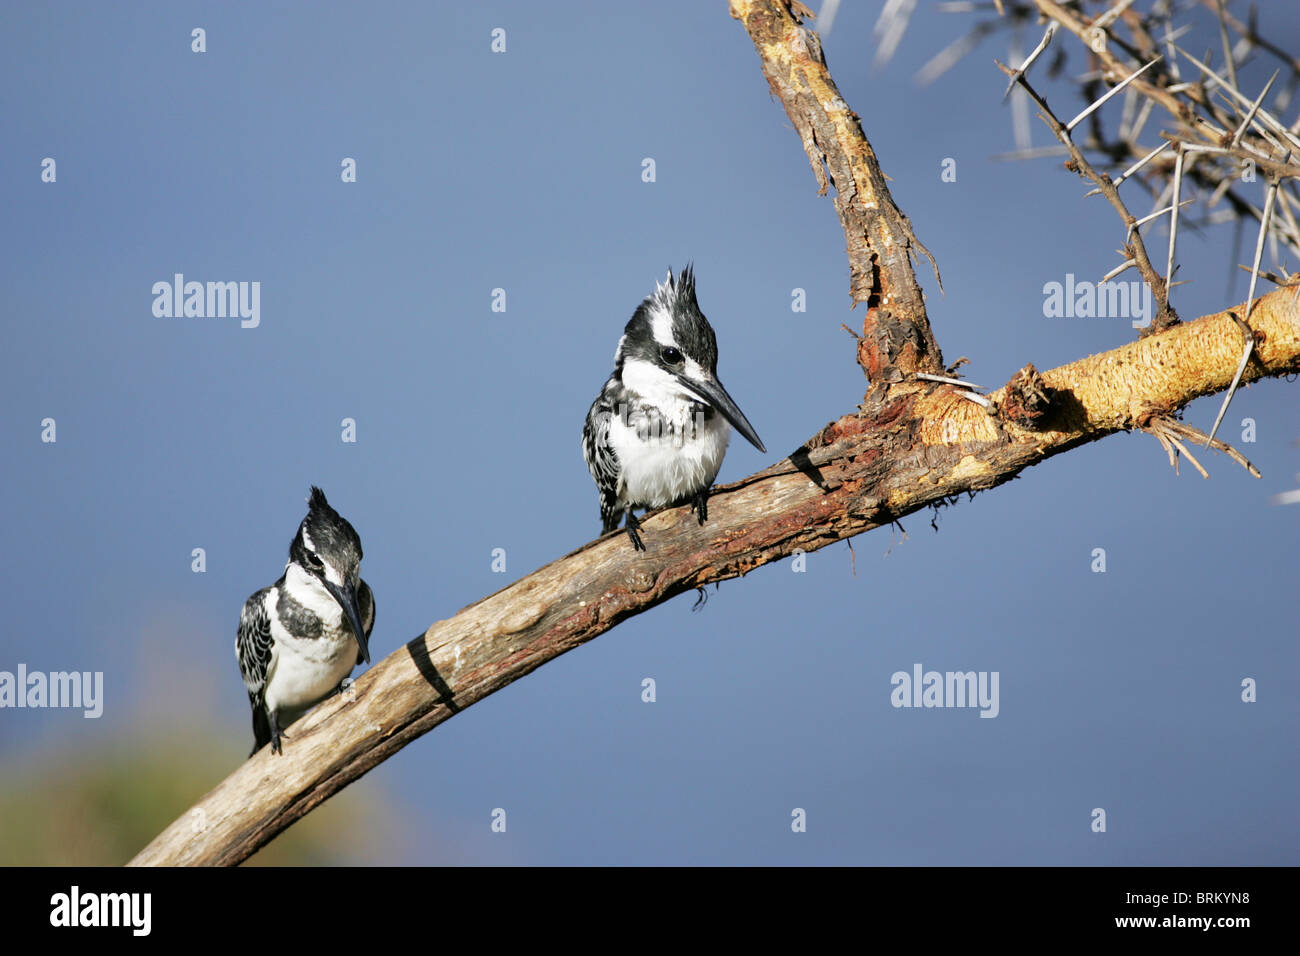 Pair of pied kingfishers perched on a thorn branch Stock Photo